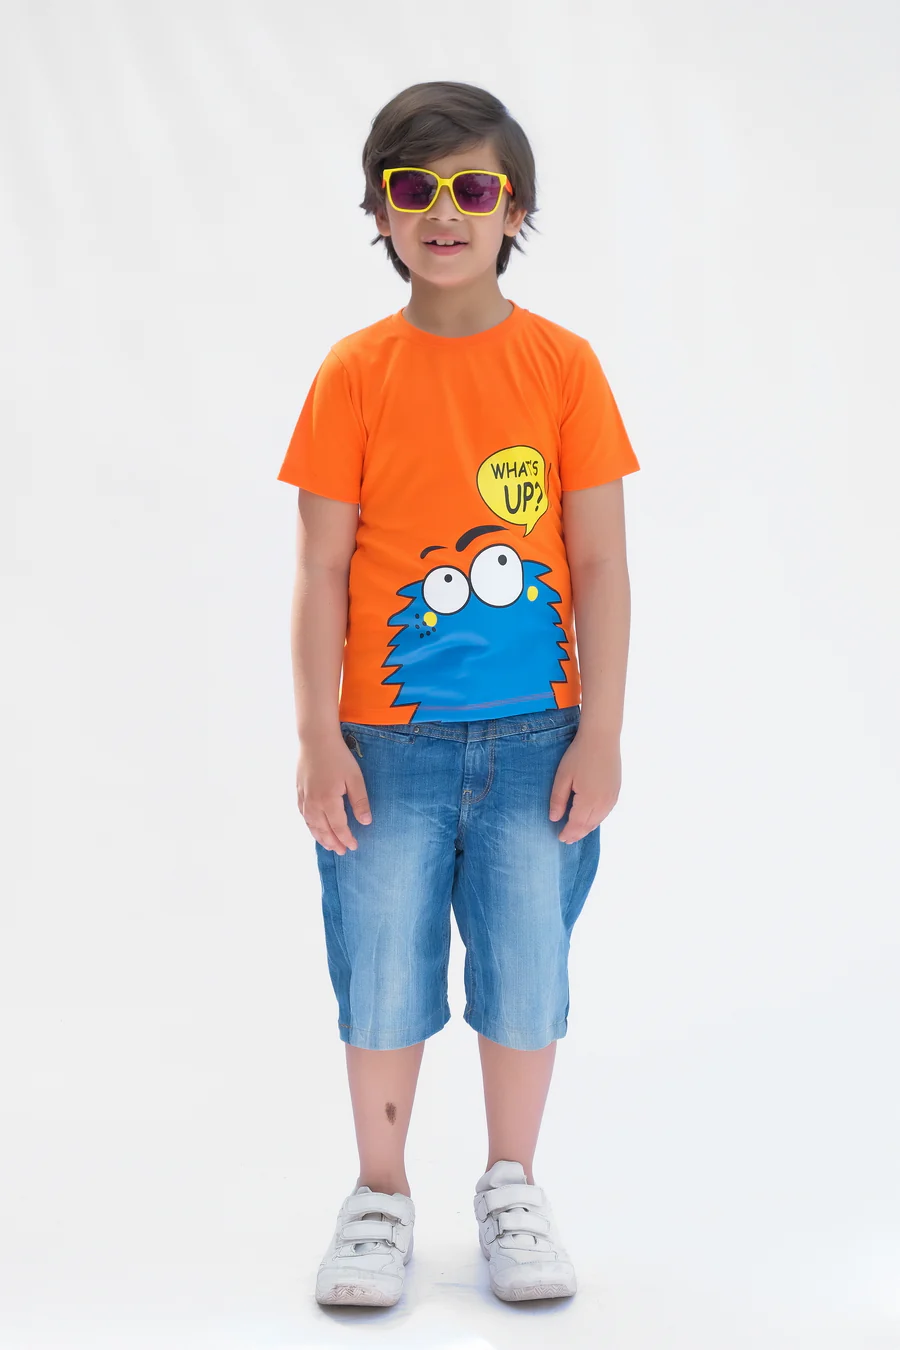 What's Up - Half Sleeves T-Shirts For Kids - Orange - SBT-334